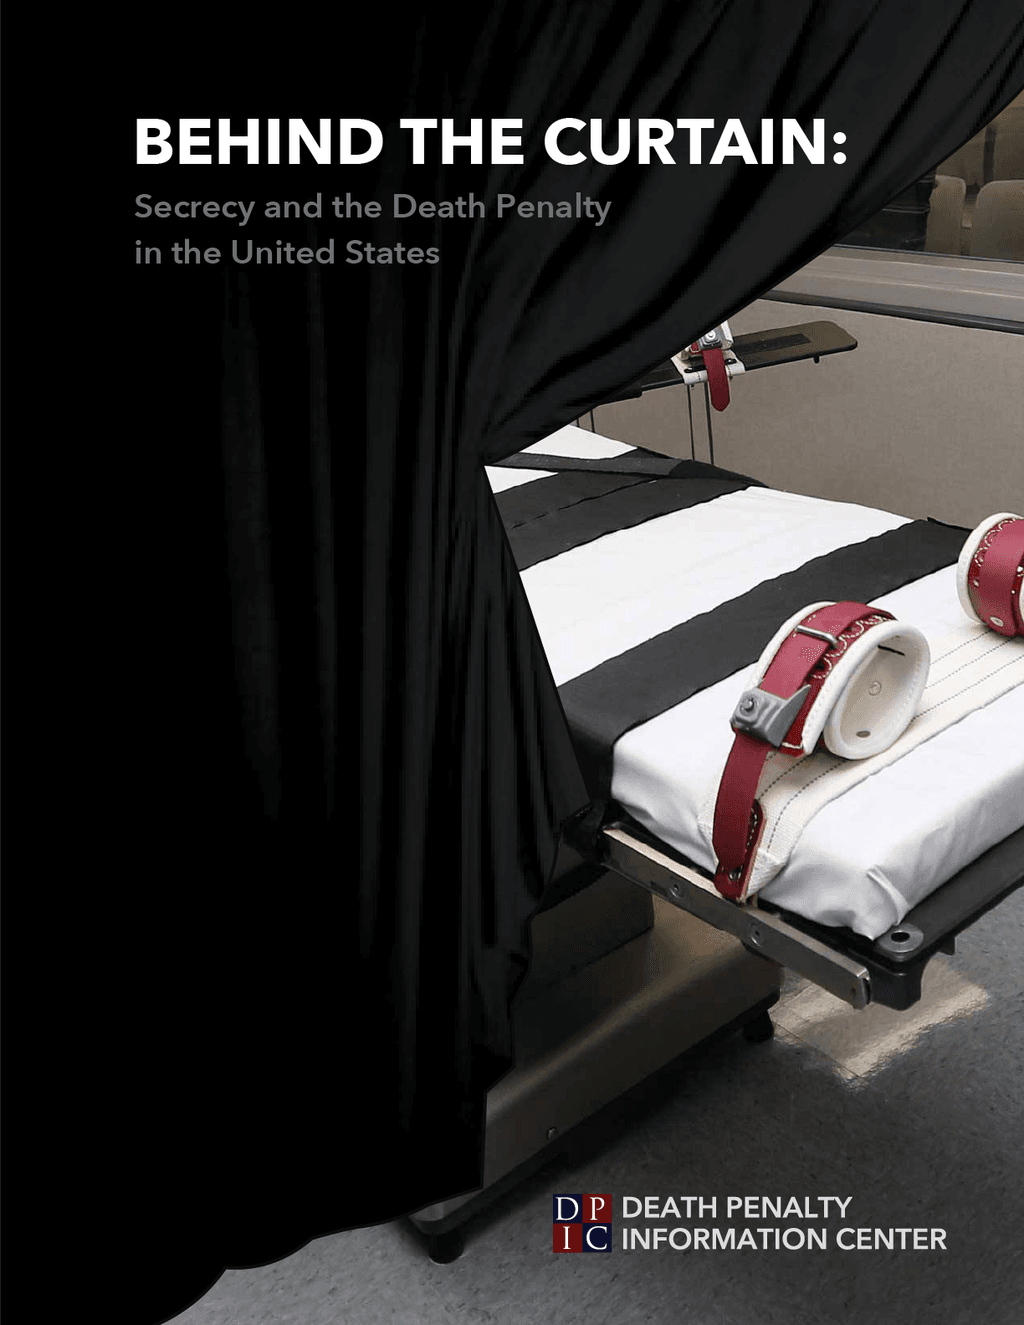 Press Release-Behind the Curtain: Secrecy and the Death Penalty in the United States